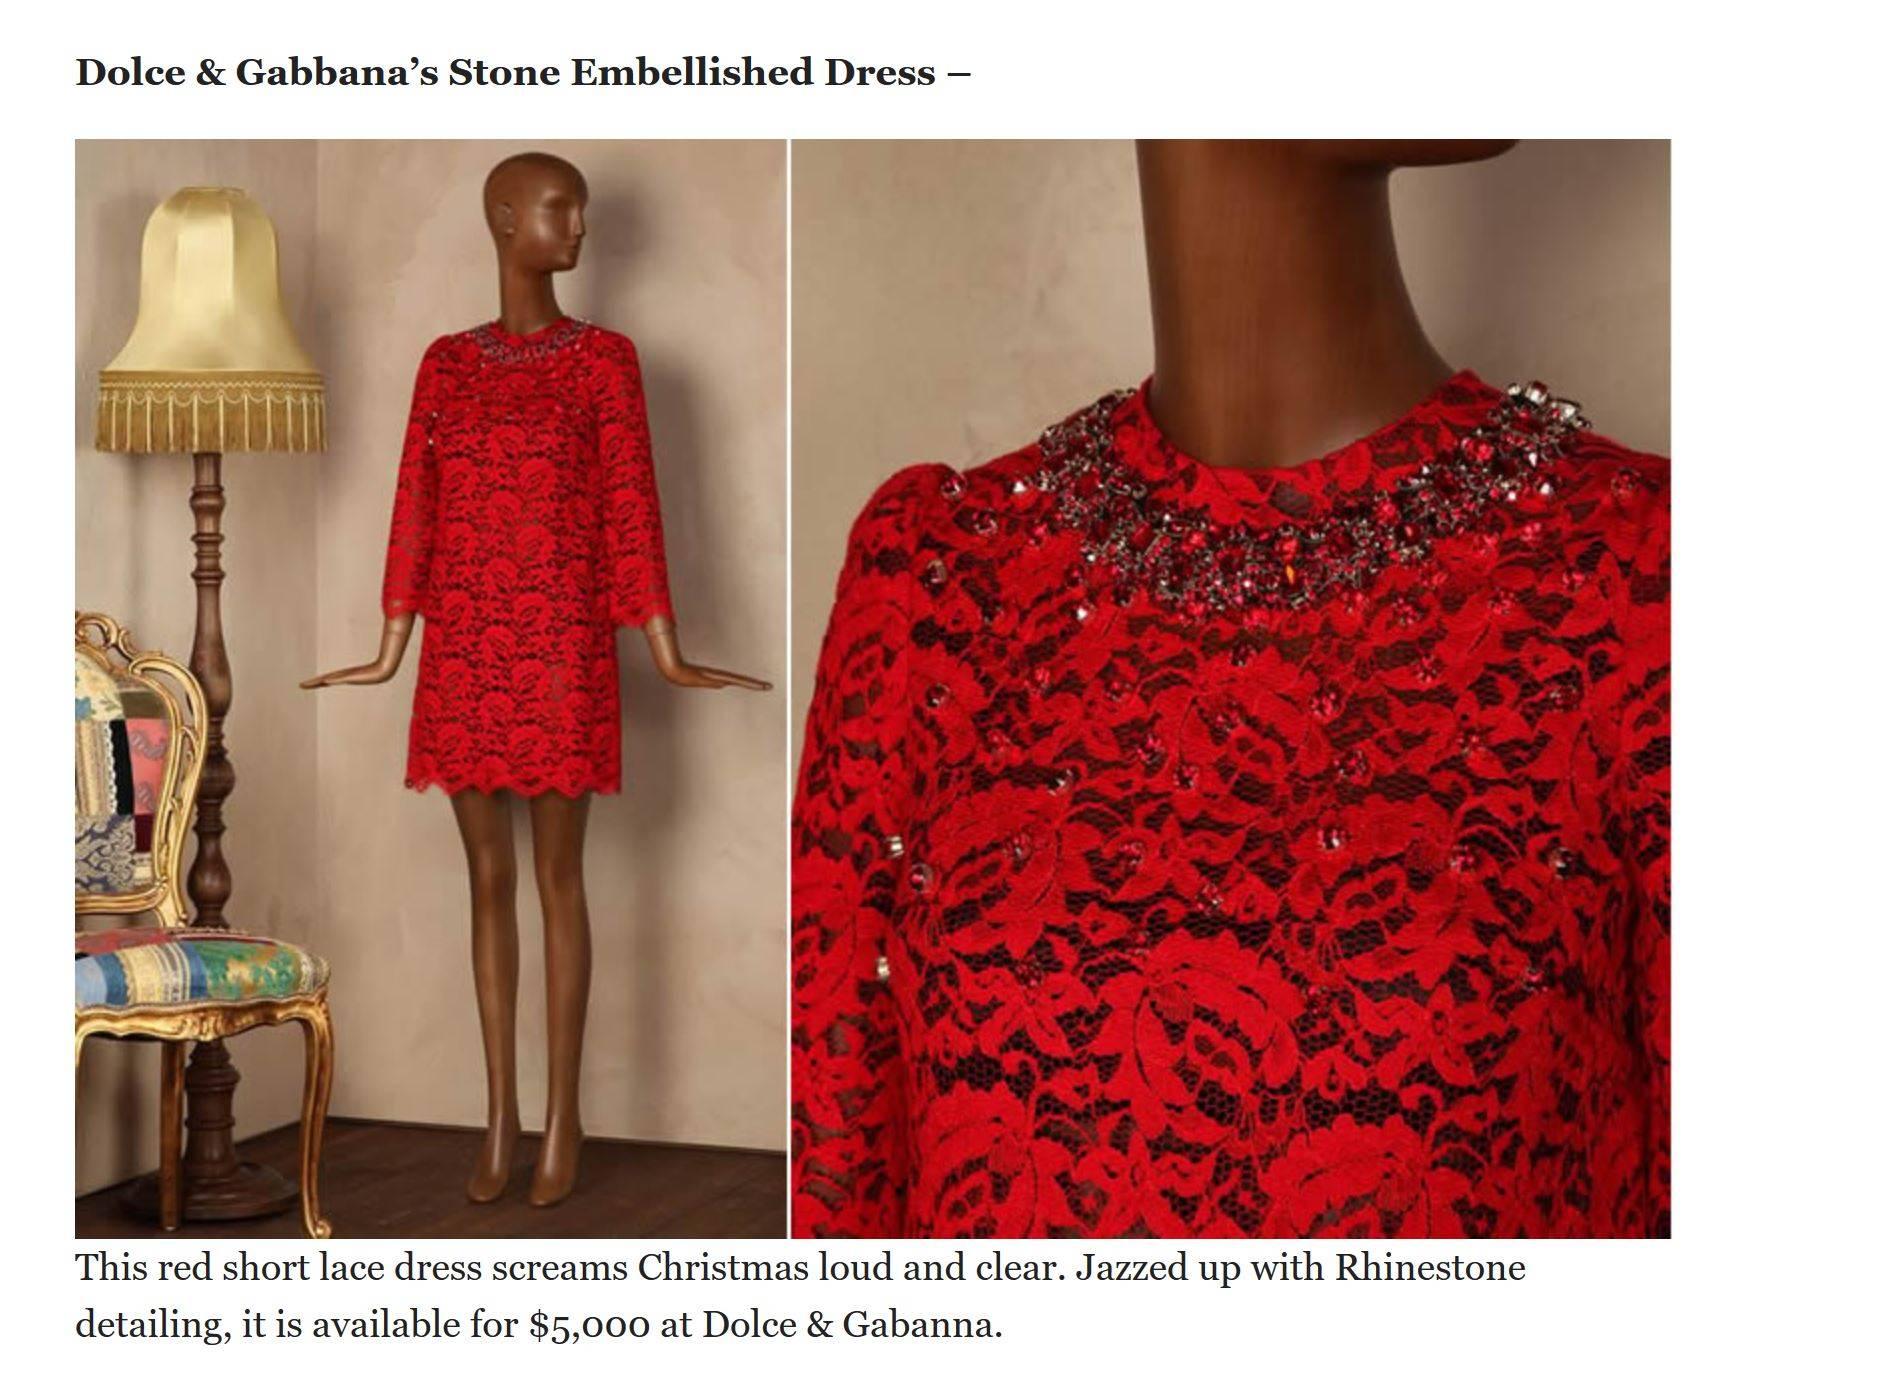 NEW Dolce & Gabbana Crystal Embellished Red Lace & Silk Dress 38 For Sale 5